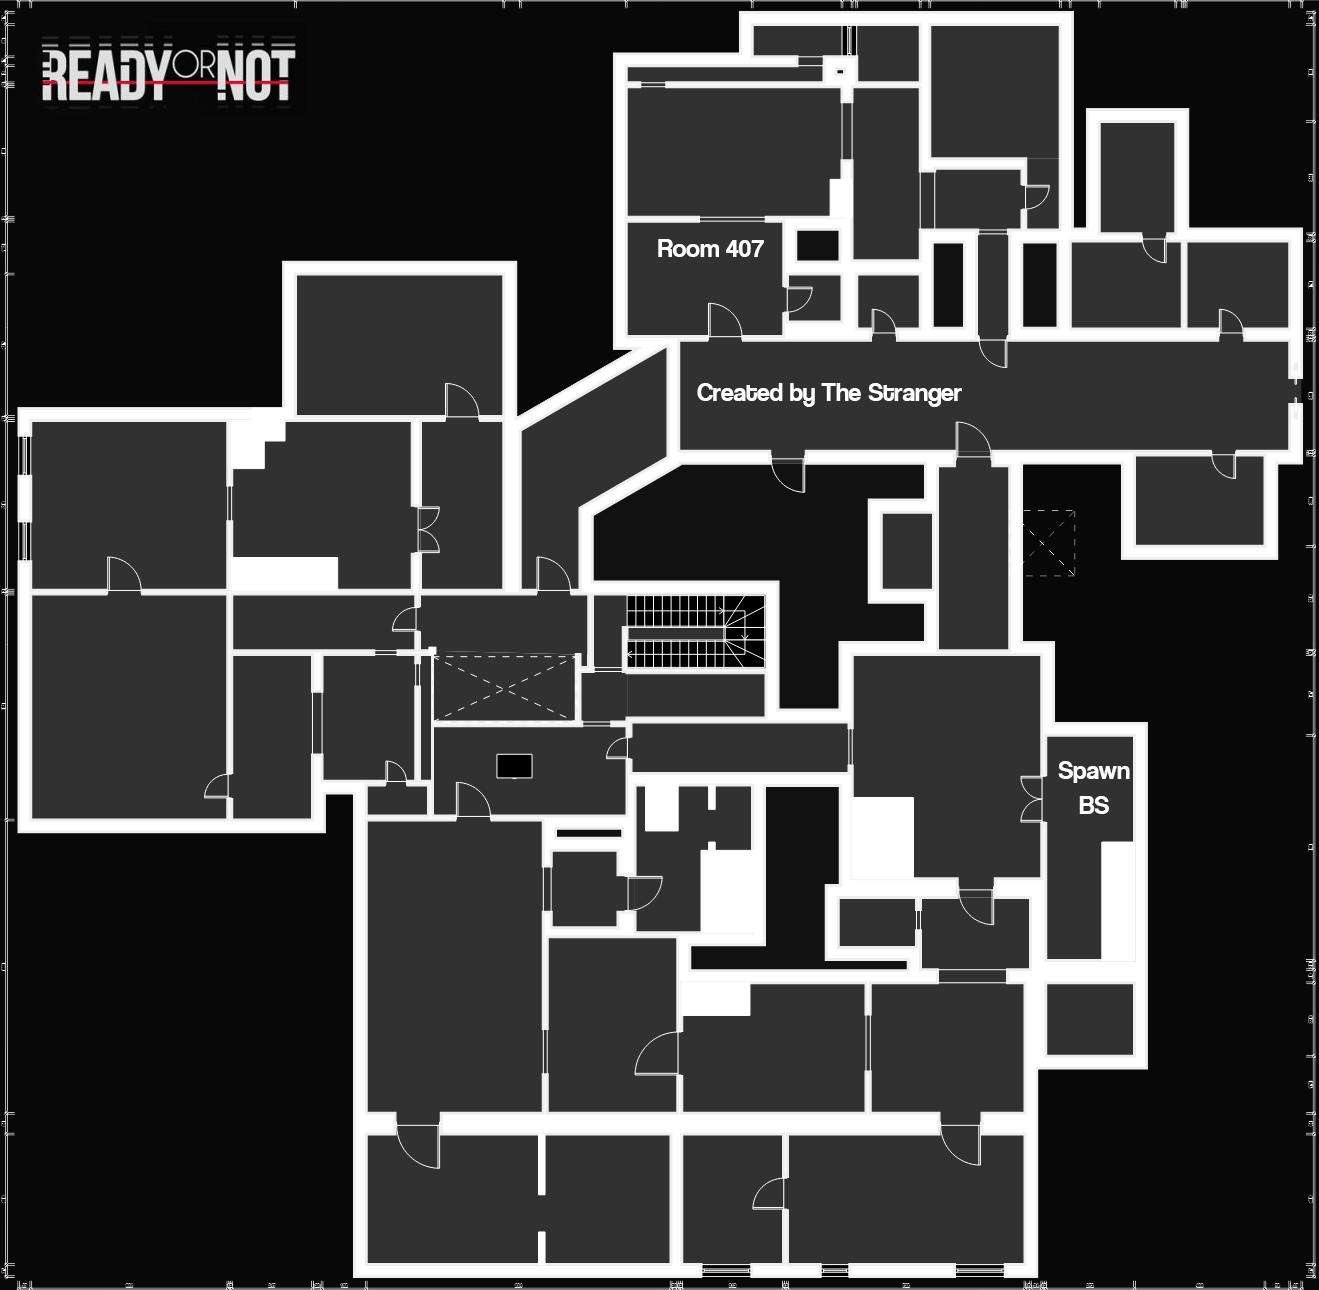 Ready Or Not All Map Blueprints Guide 8776